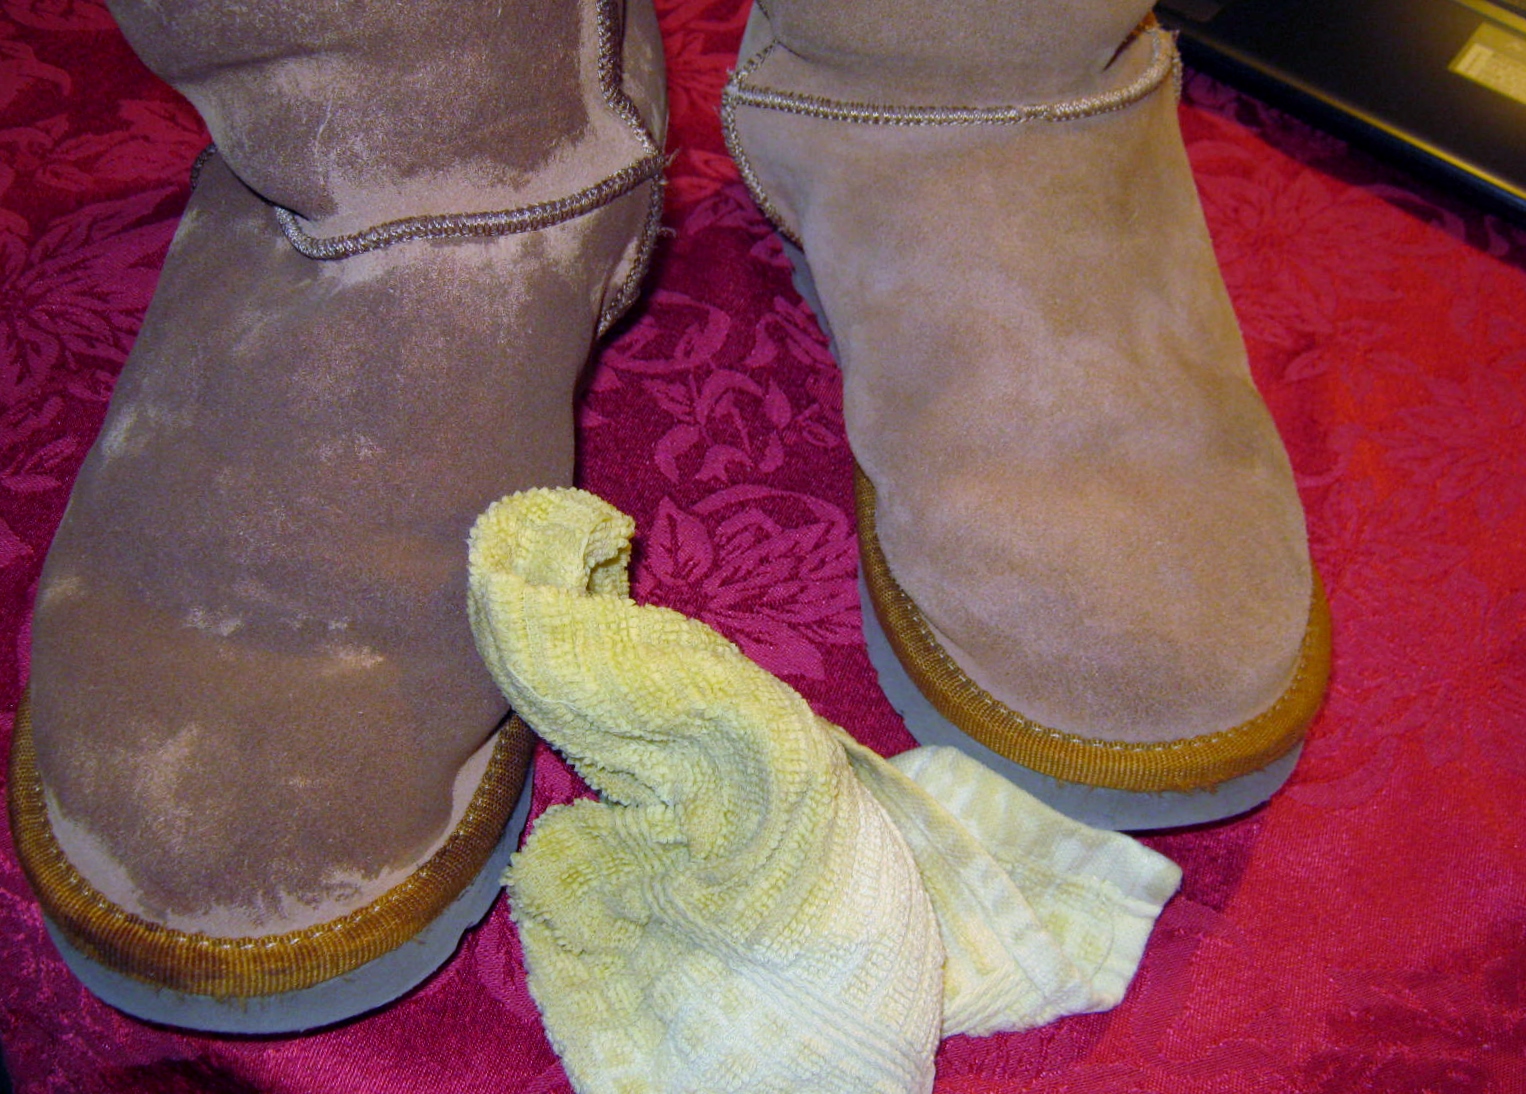 uggs got wet and stained